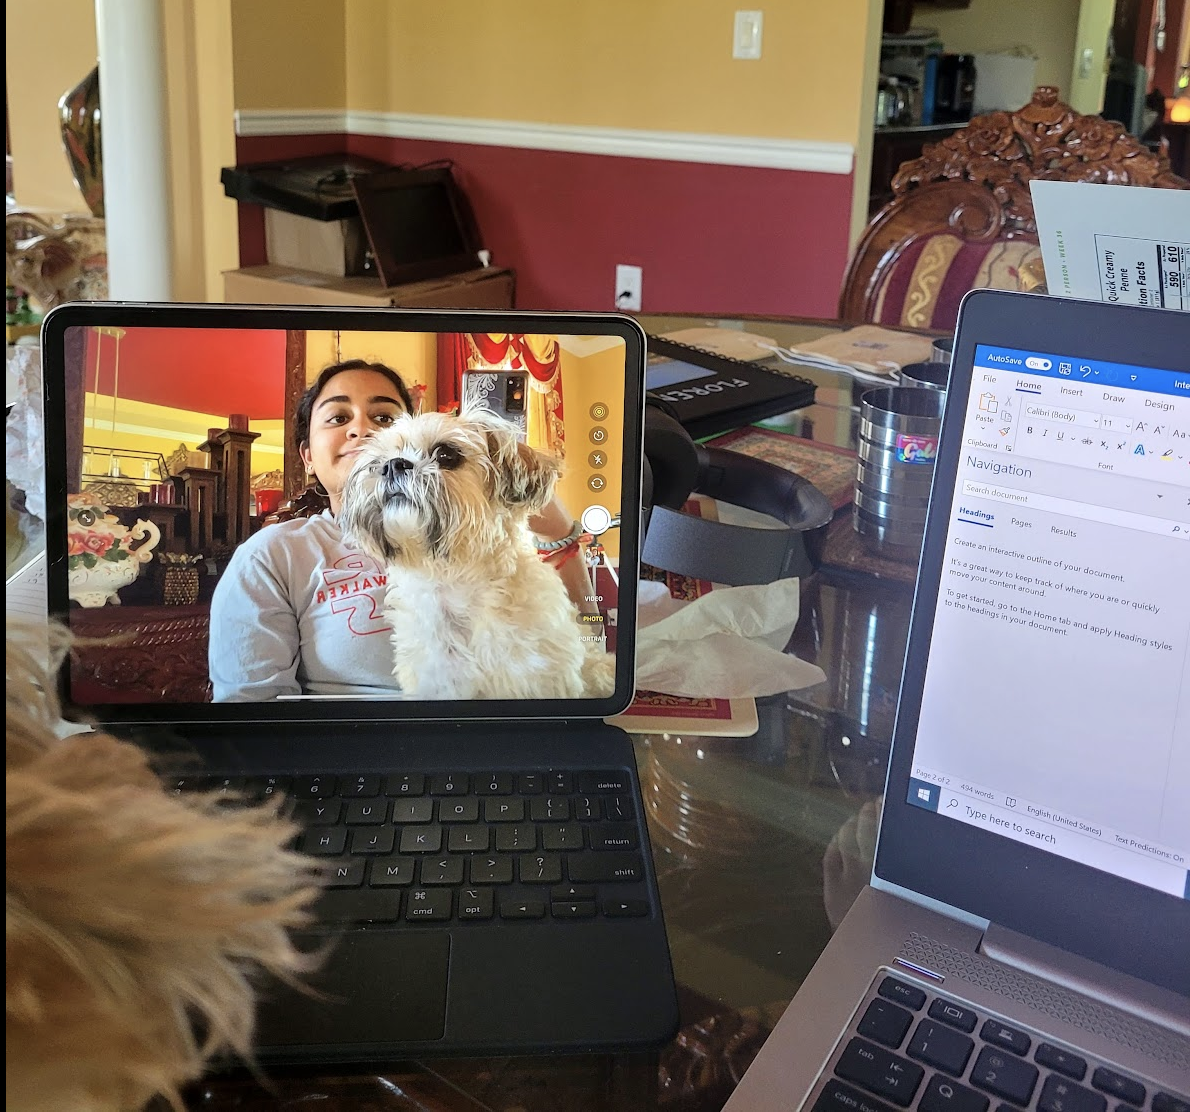 Eshika sitting at her remote work setup with a small dog on her lap.